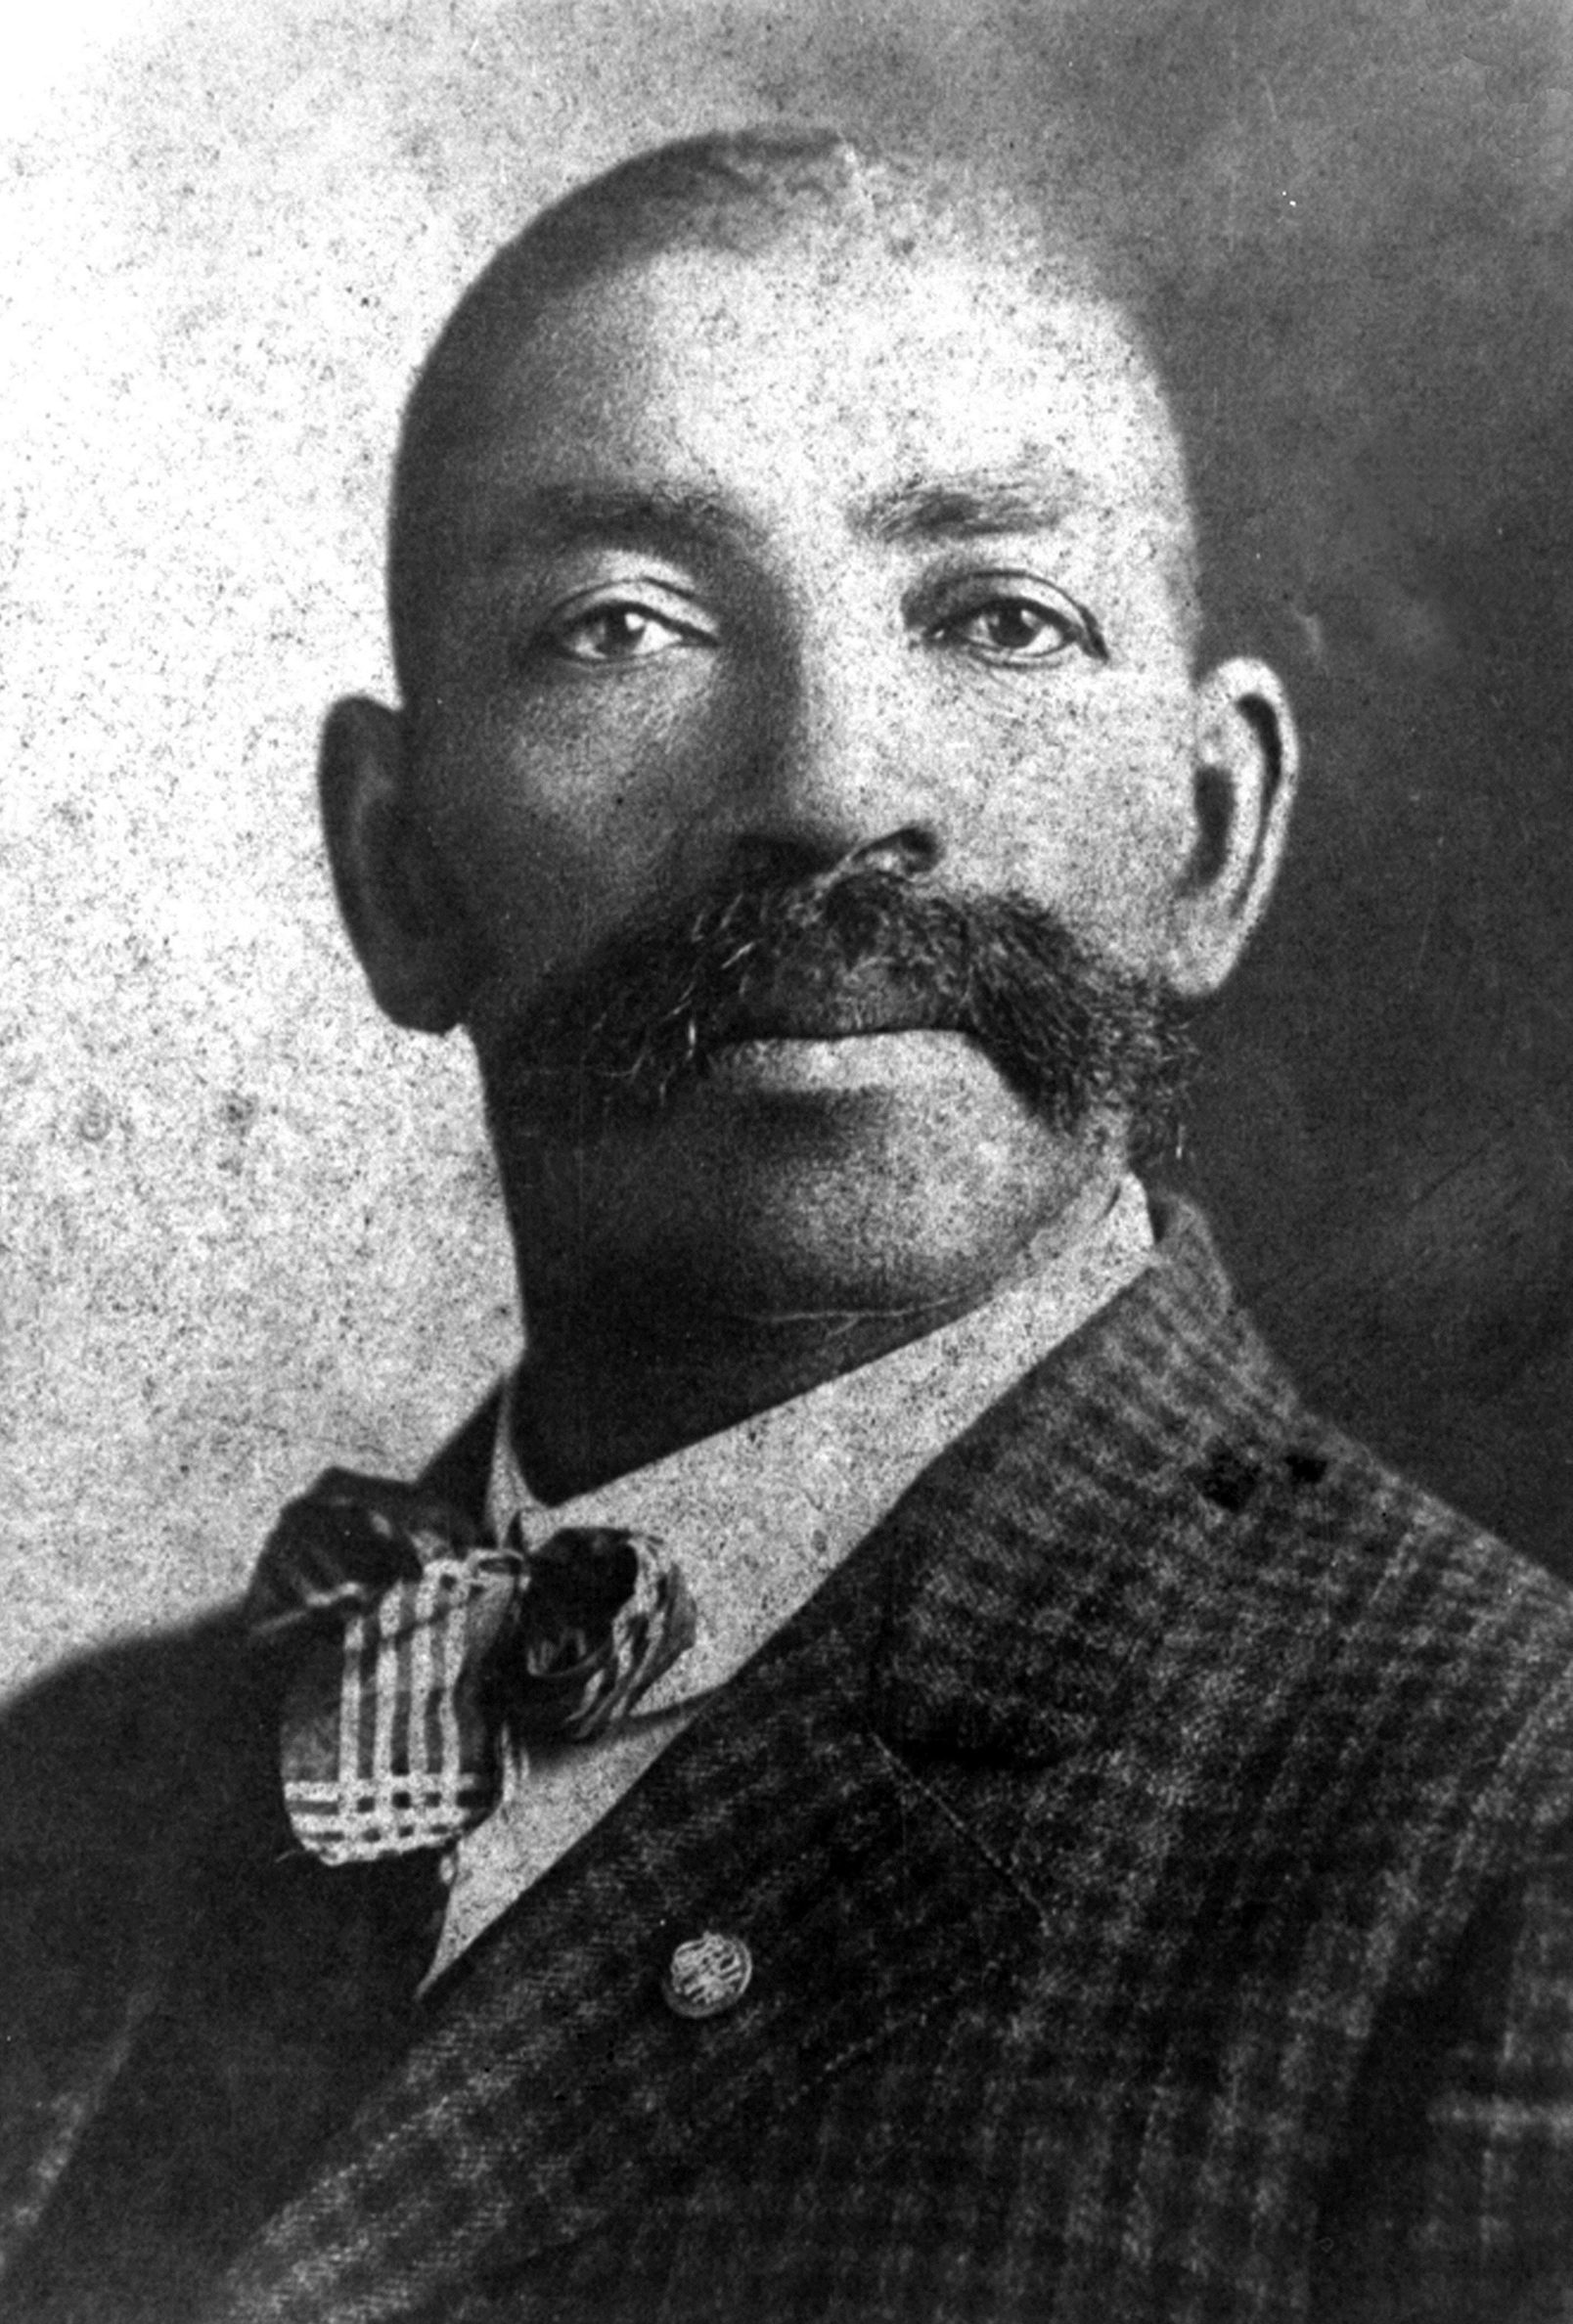 The Real Black Cowboys That Inspired Netflix's The Harder They Fall